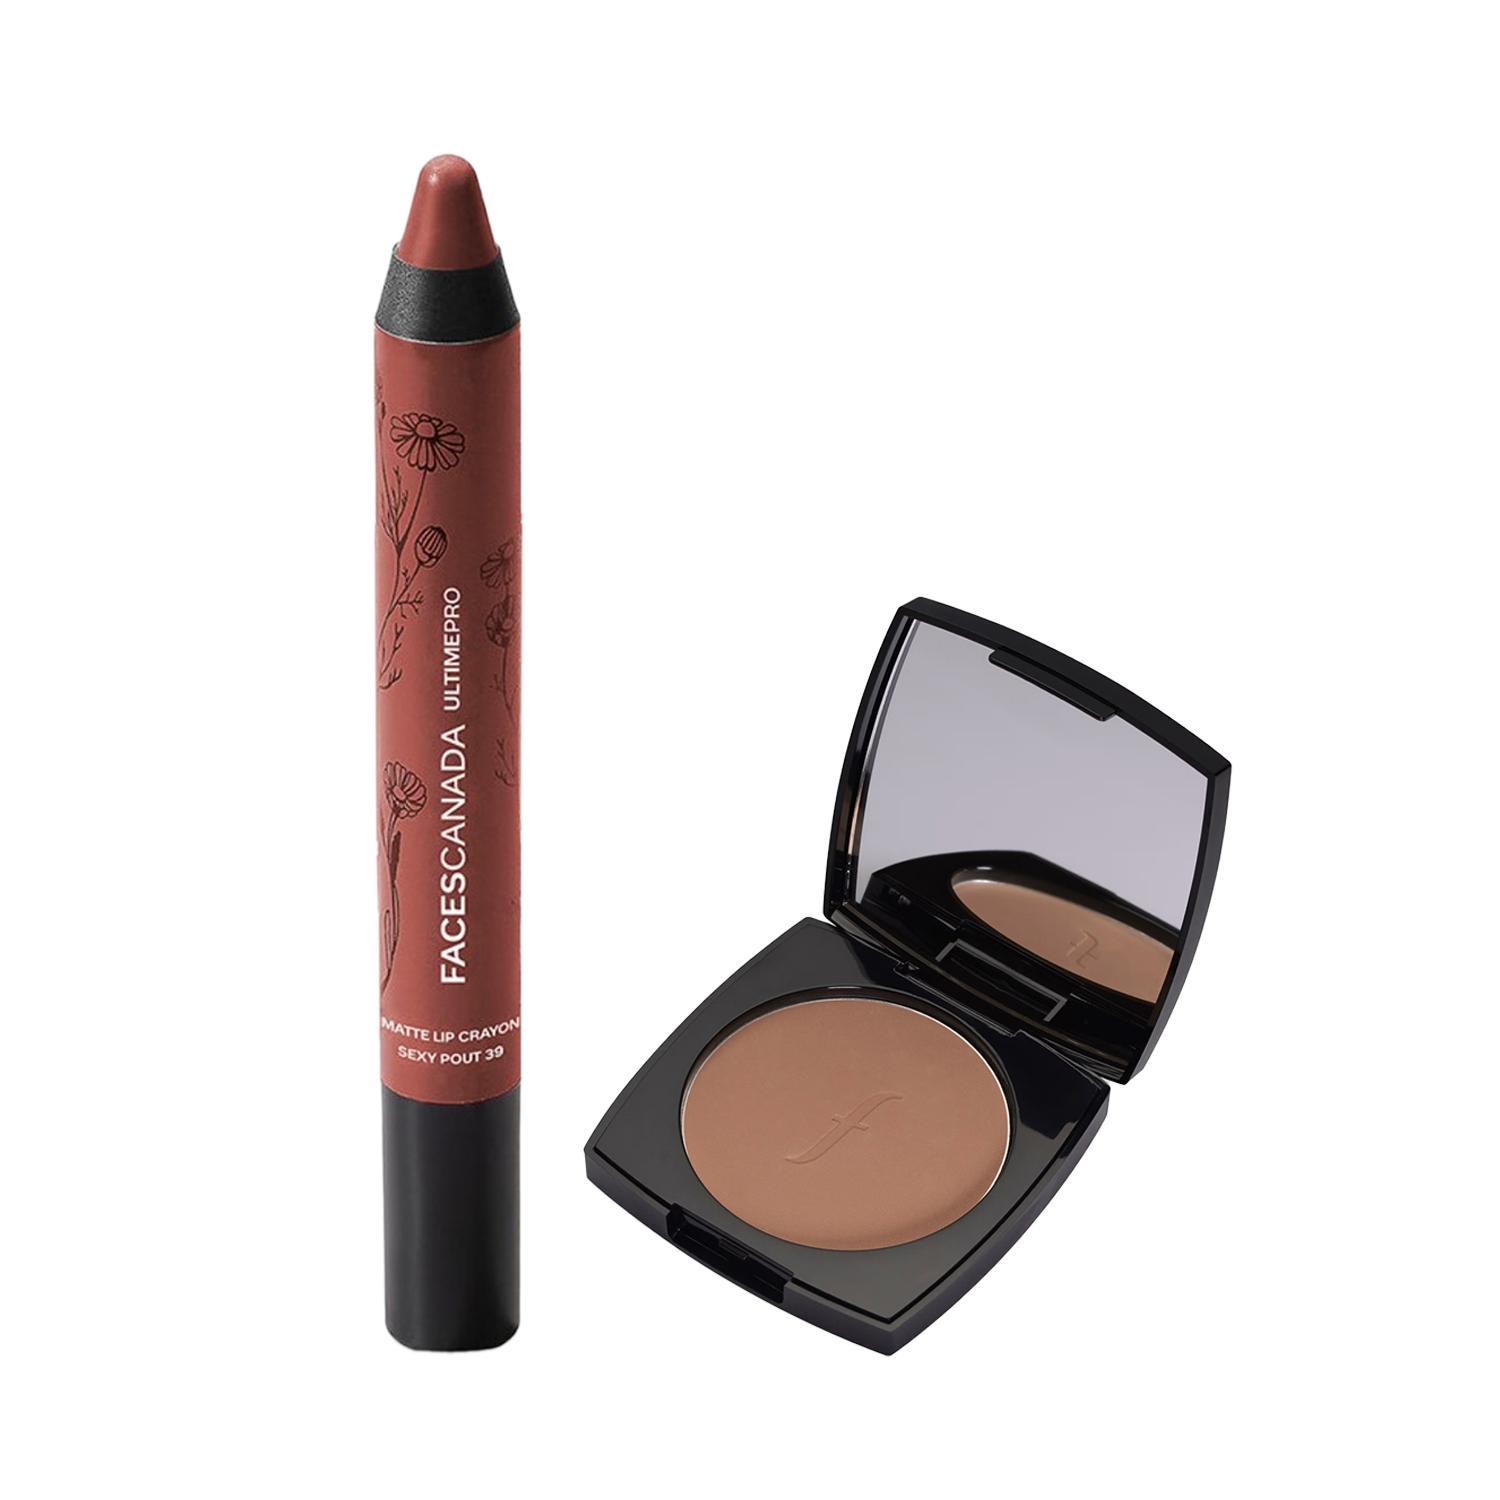 faces canada sun defense cc powder - sand (8g) and matte lip crayon - wrapped up (2.8g) combo